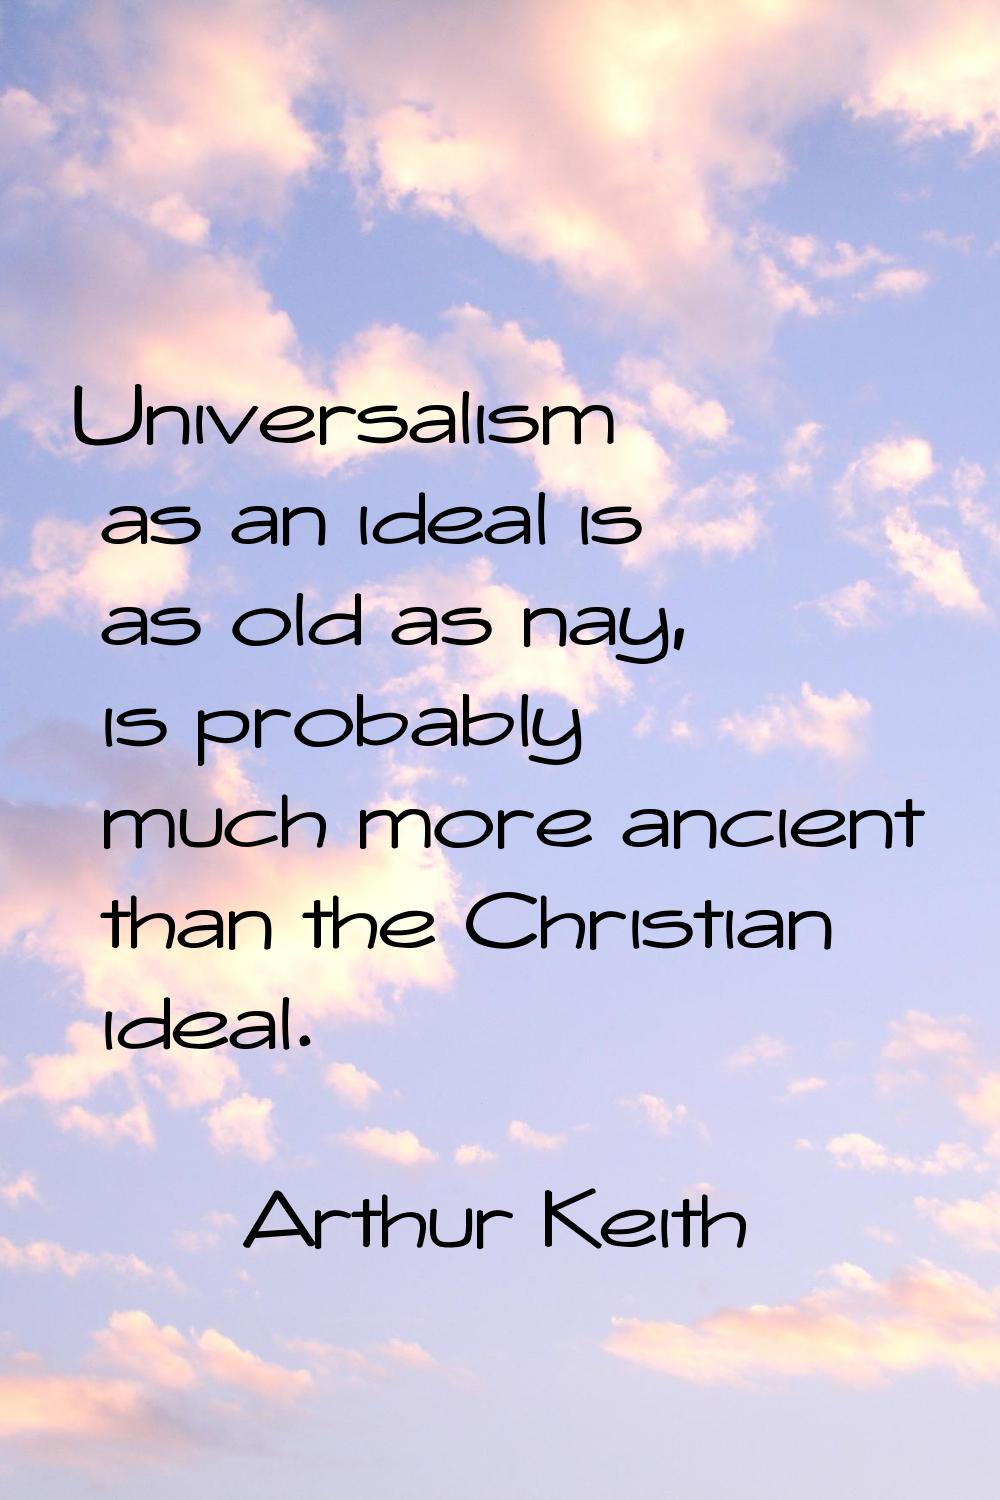 Universalism as an ideal is as old as nay, is probably much more ancient than the Christian ideal.